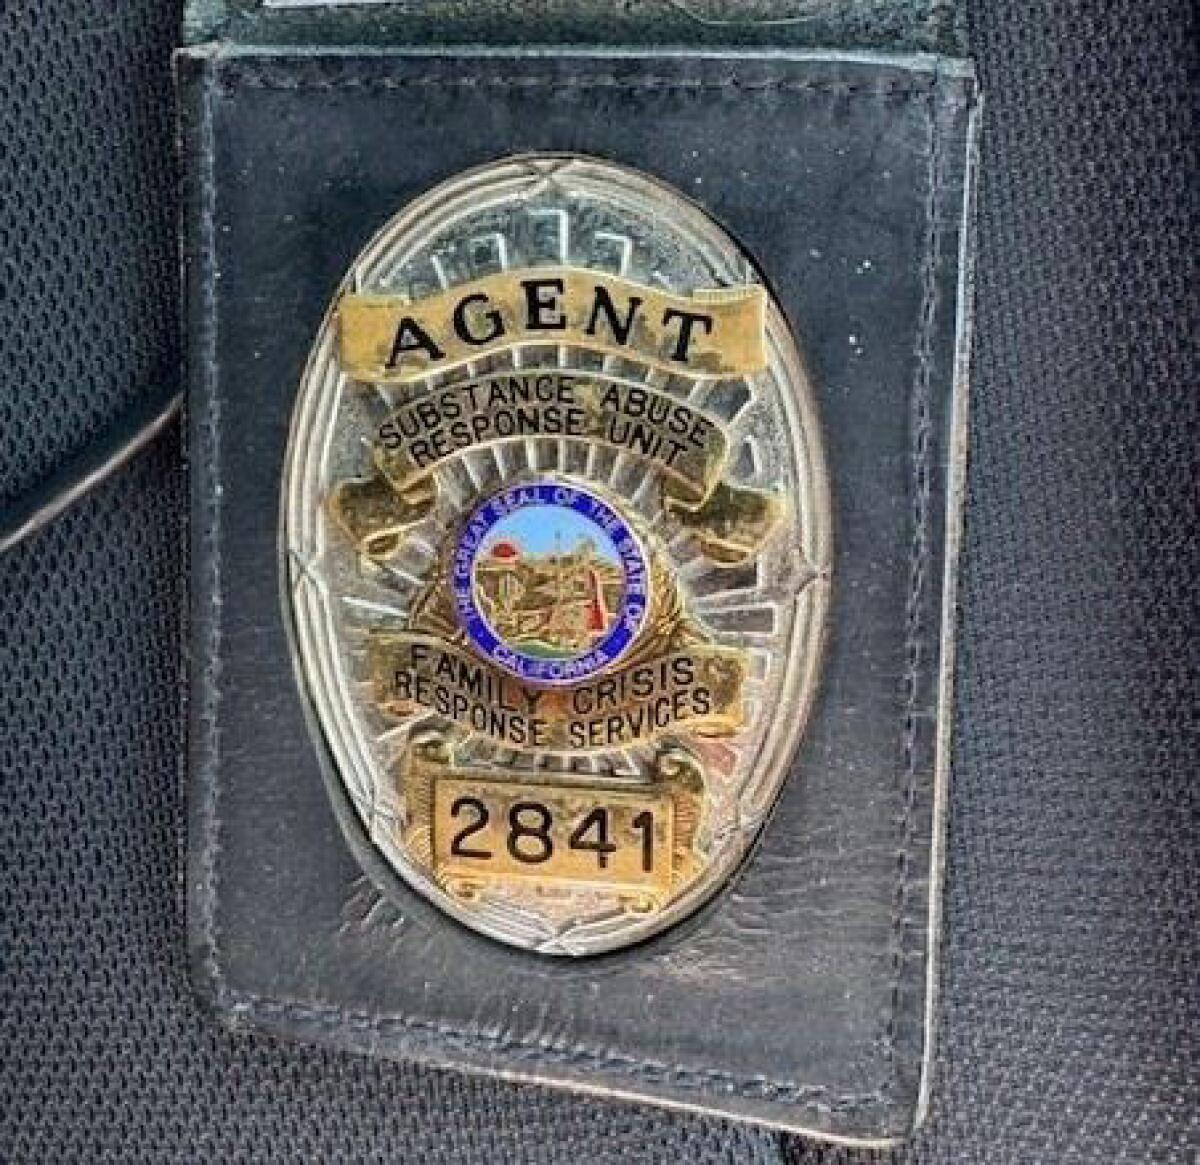 An image of a law enforcement badge authorities say is fake